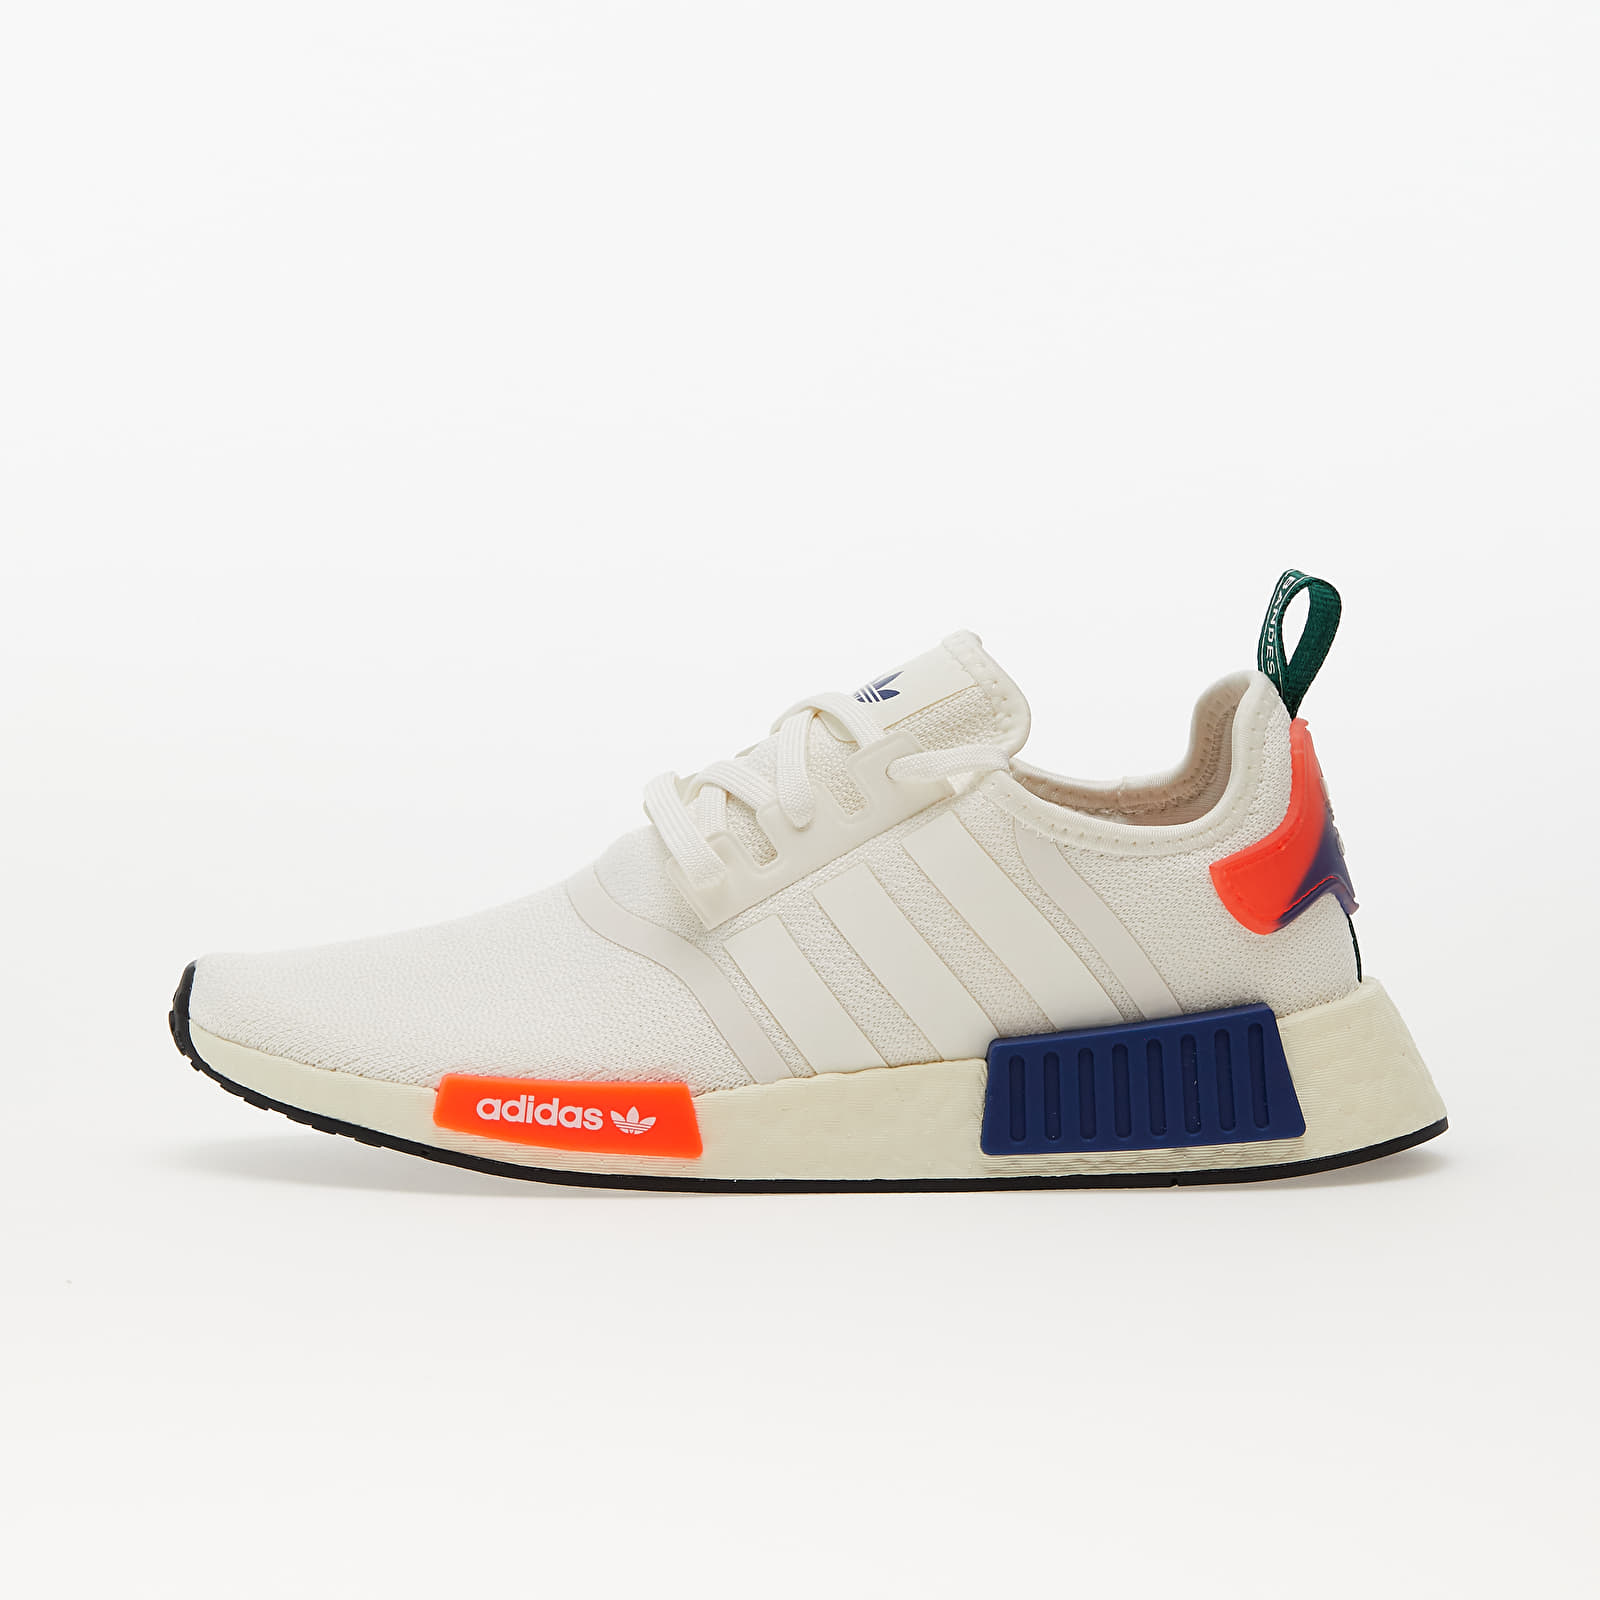 Pánské tenisky a boty adidas NMD_R1 Cloud White/ Off White/ Solid Red